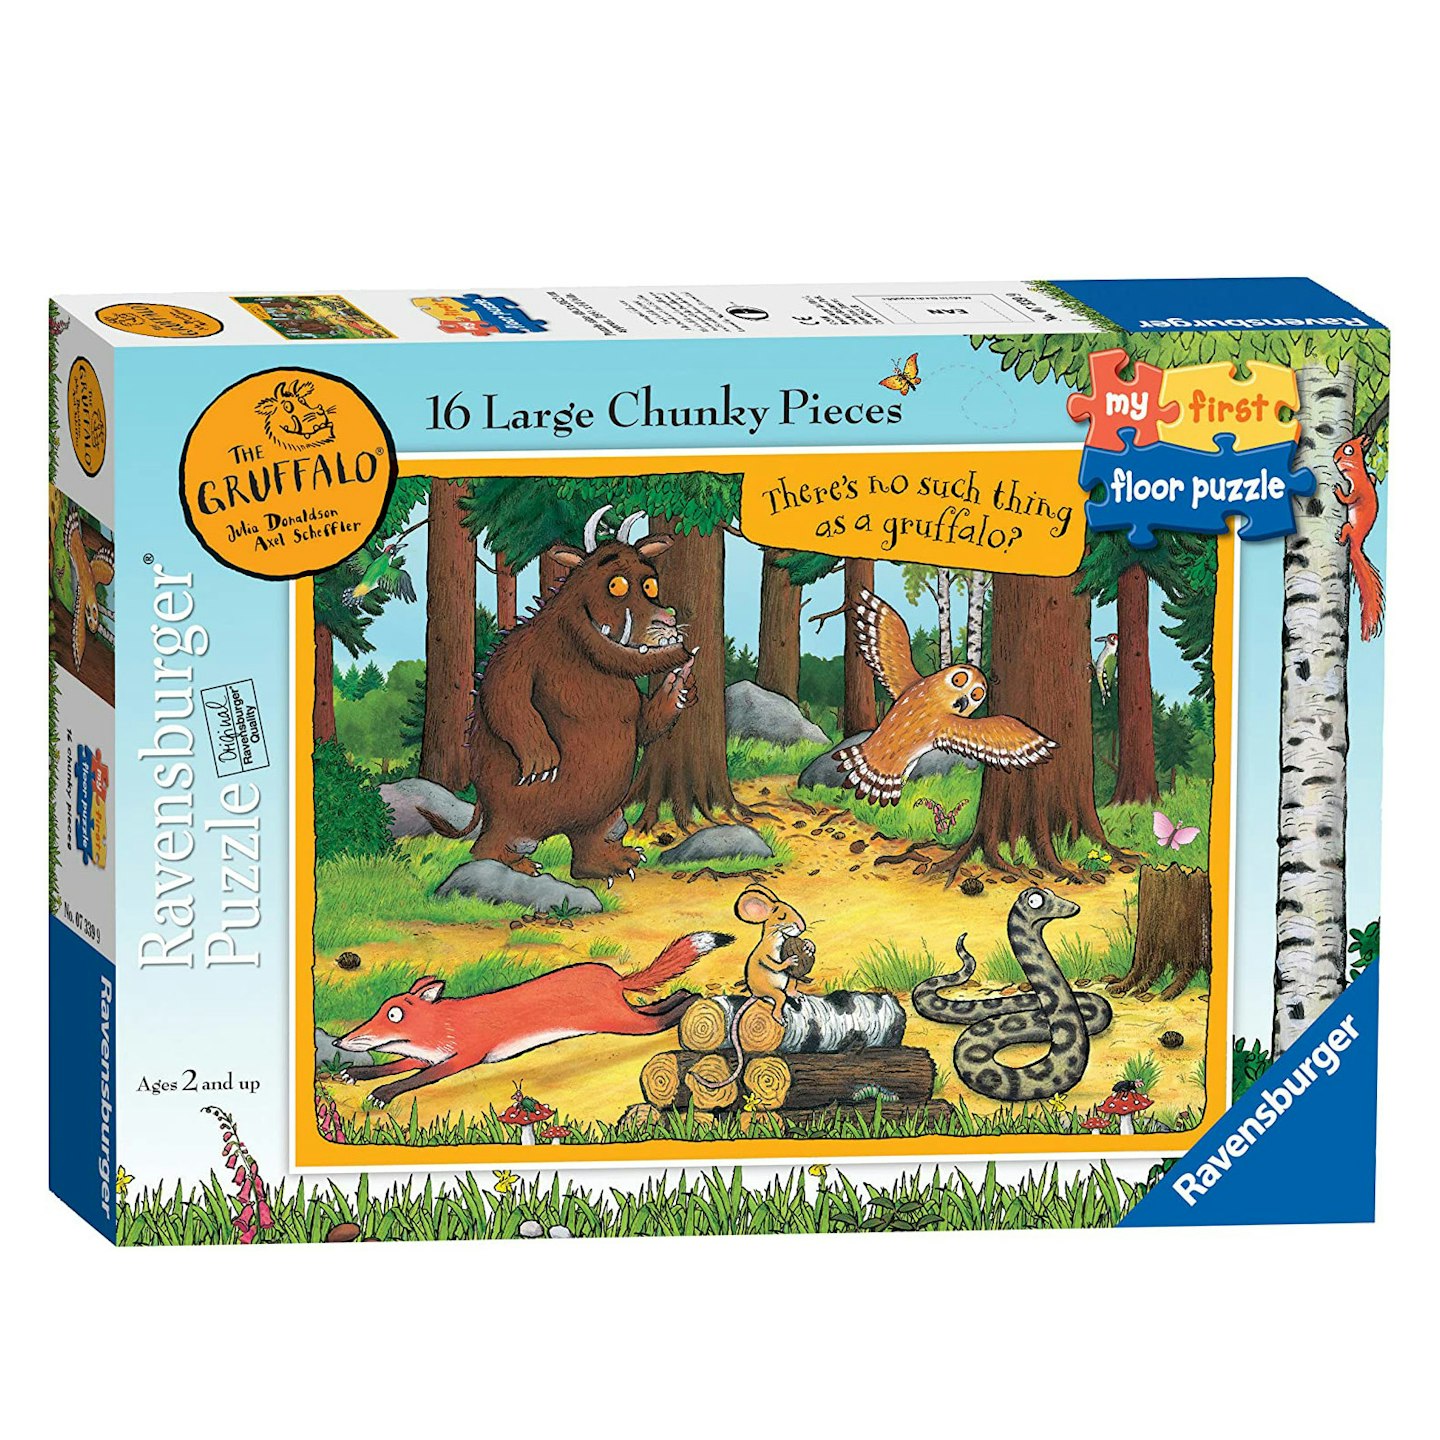 Ravensburger My First Floor Puzzle - The Gruffalo, 16 Piece Jigsaw Puzzles